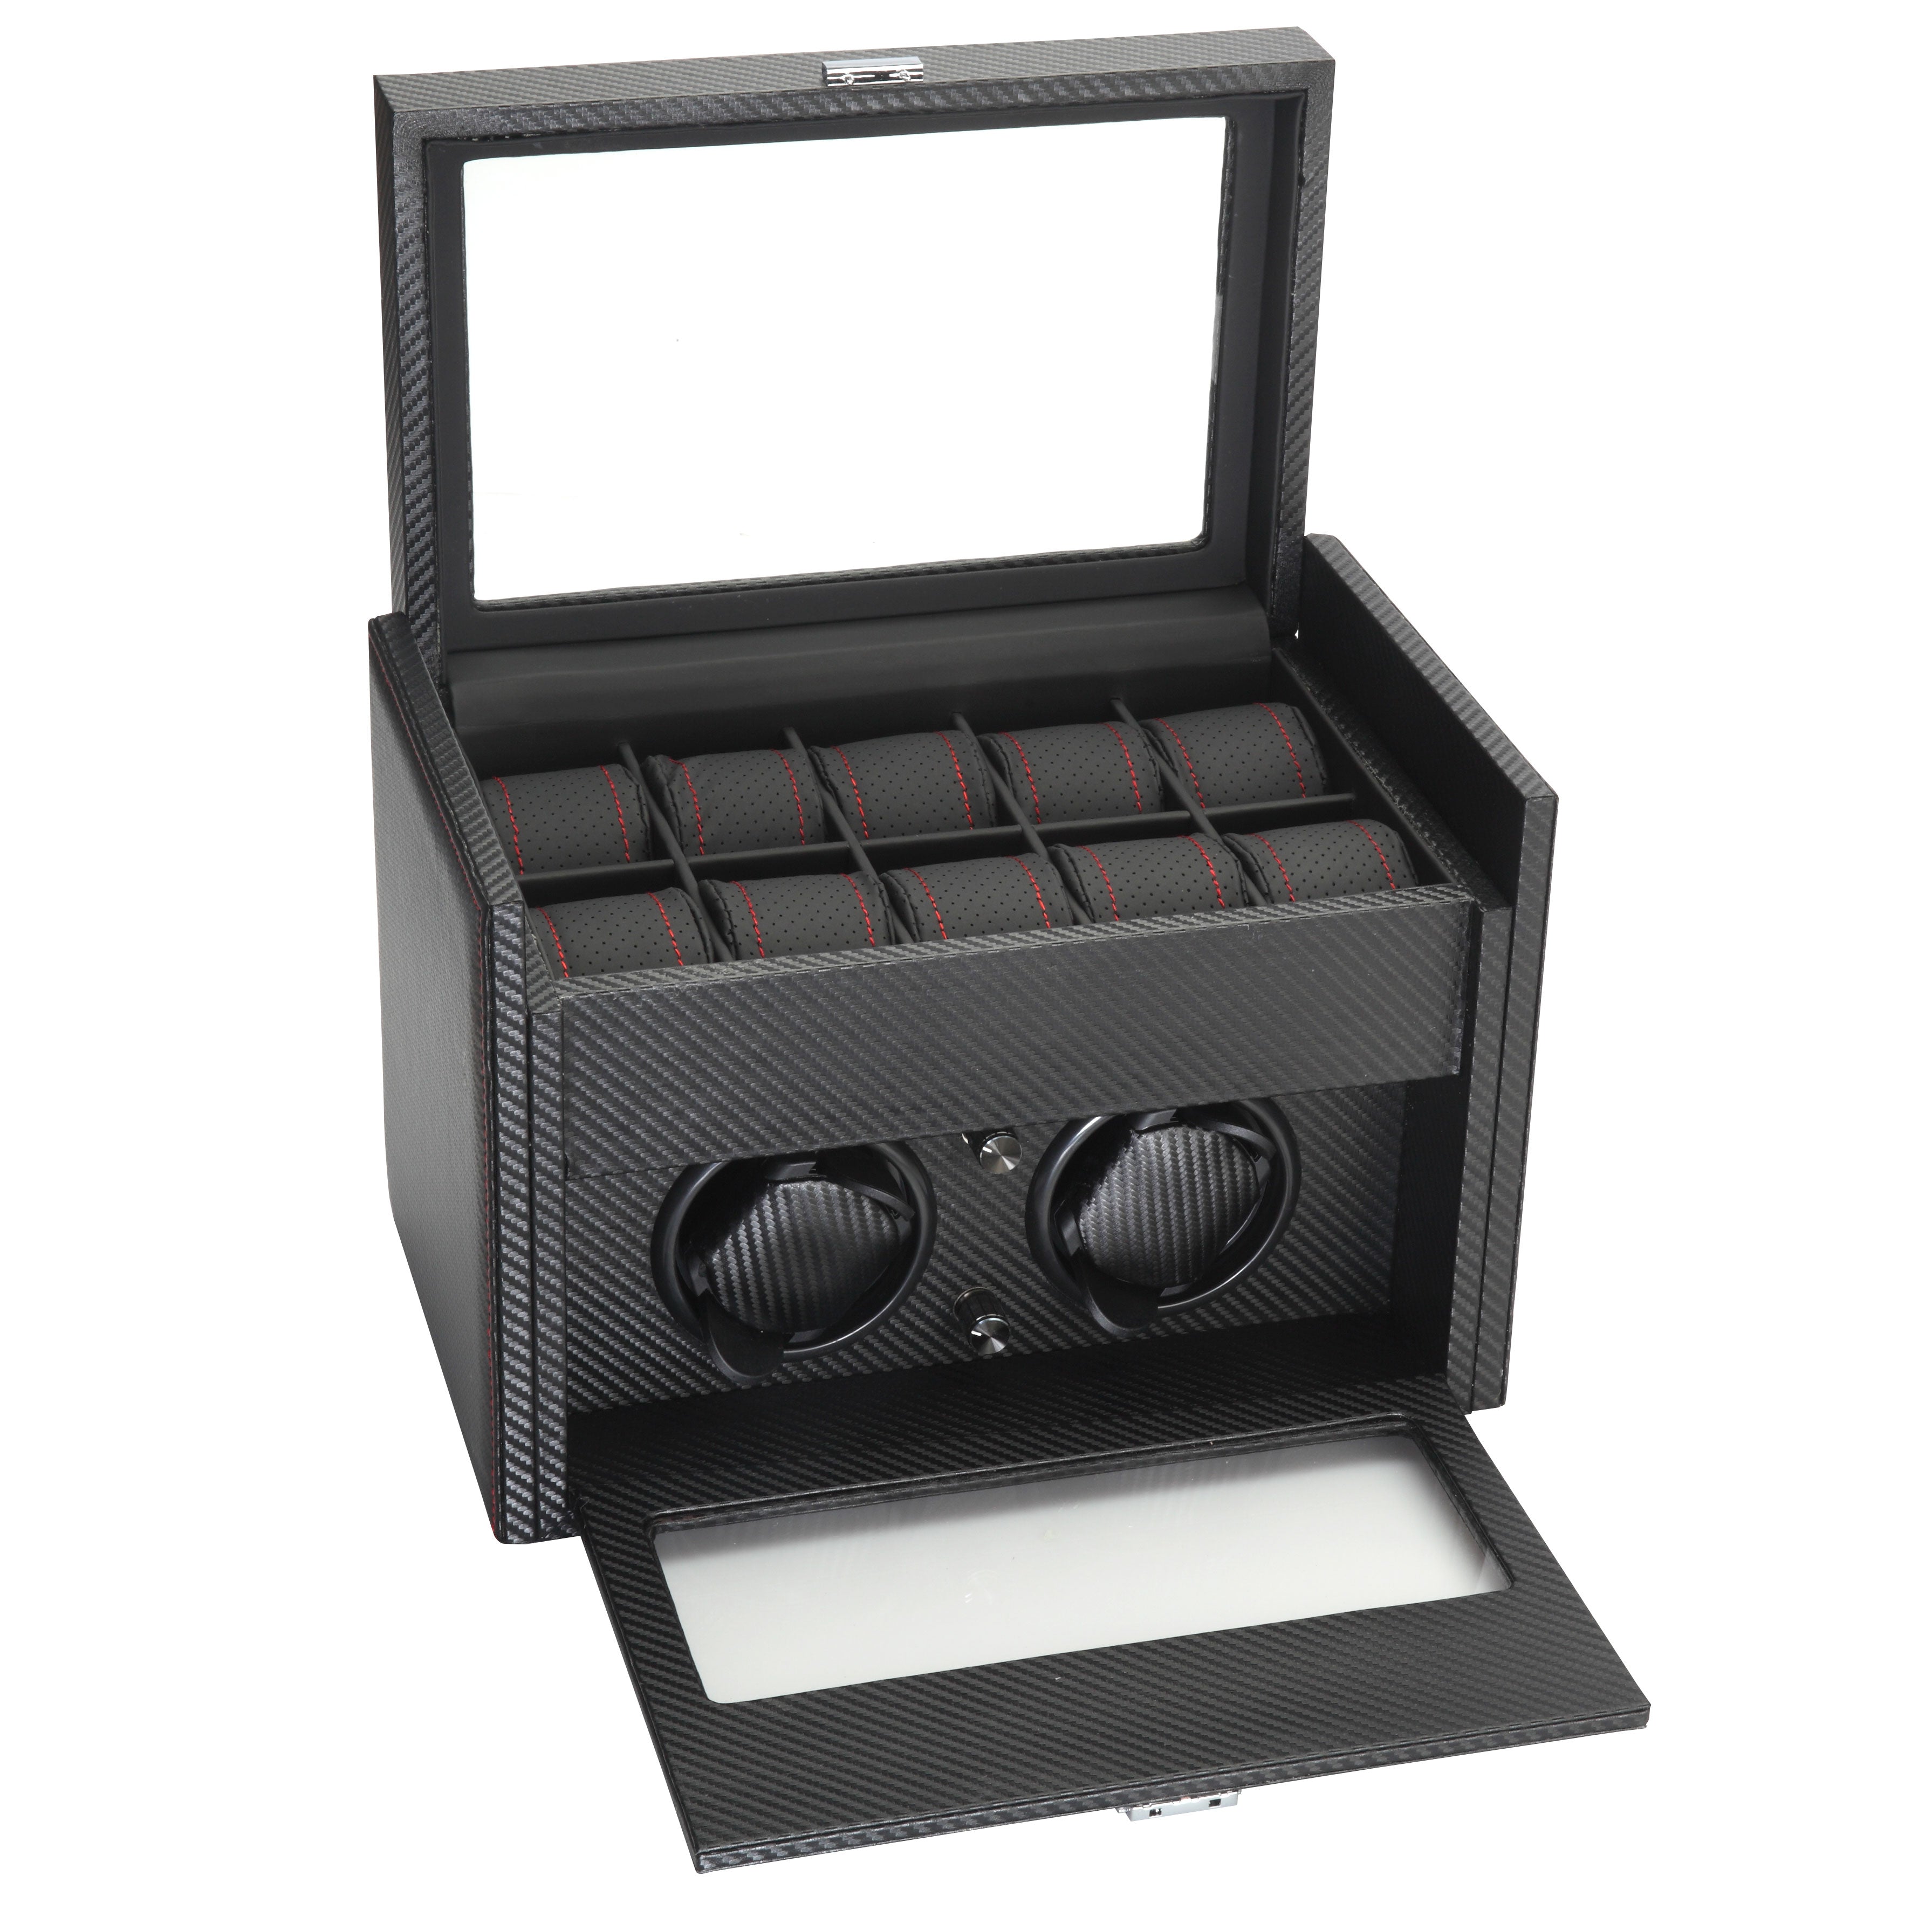 Diplomat "Modena" Double Watch Winder in Carbon Fiber